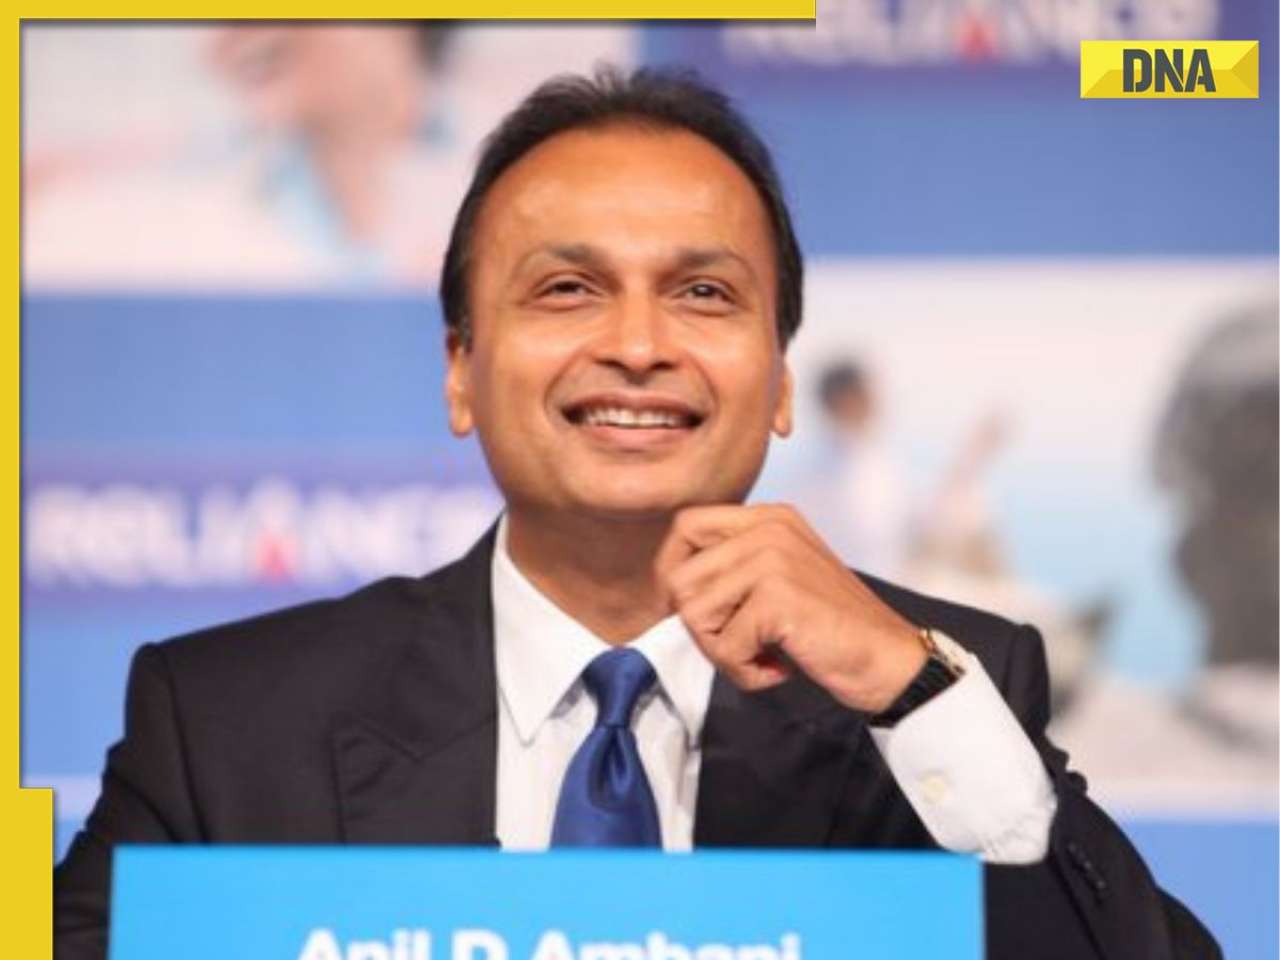 Anil Ambani on the rise again with this company, share prices soaring to new heights…